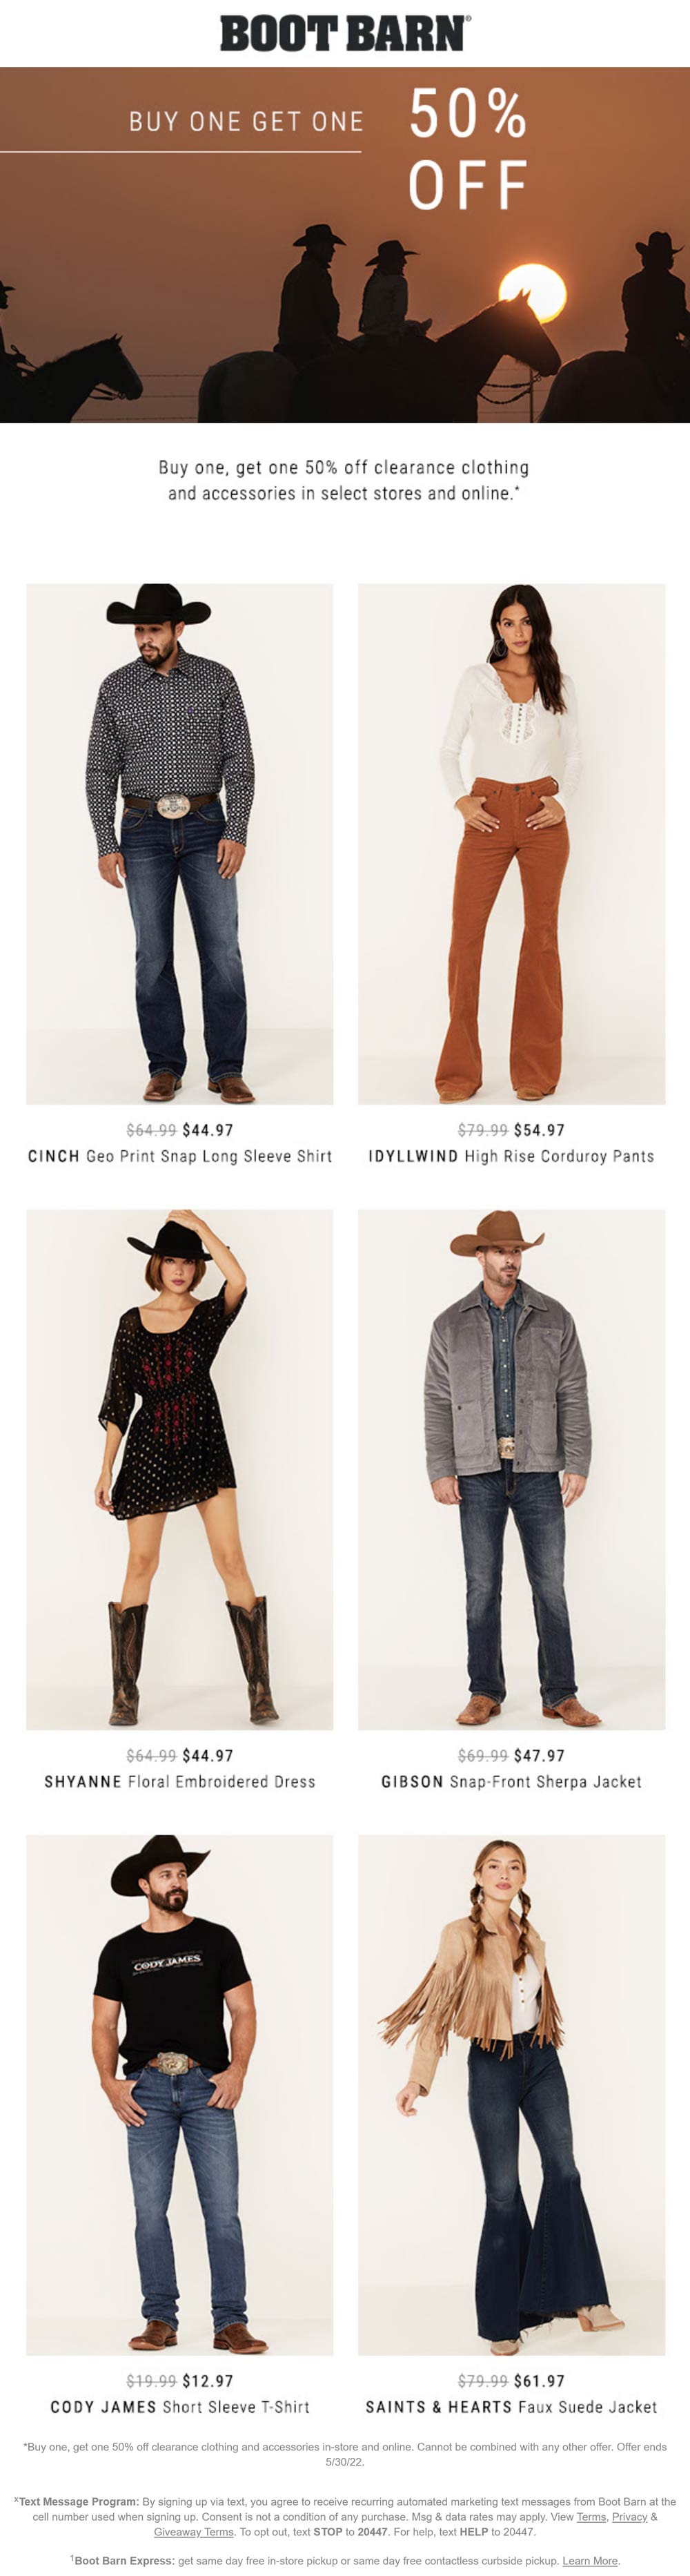 Boot Barn stores Coupon  Second clearance item extra 50% off at Boot Barn, ditto online #bootbarn 